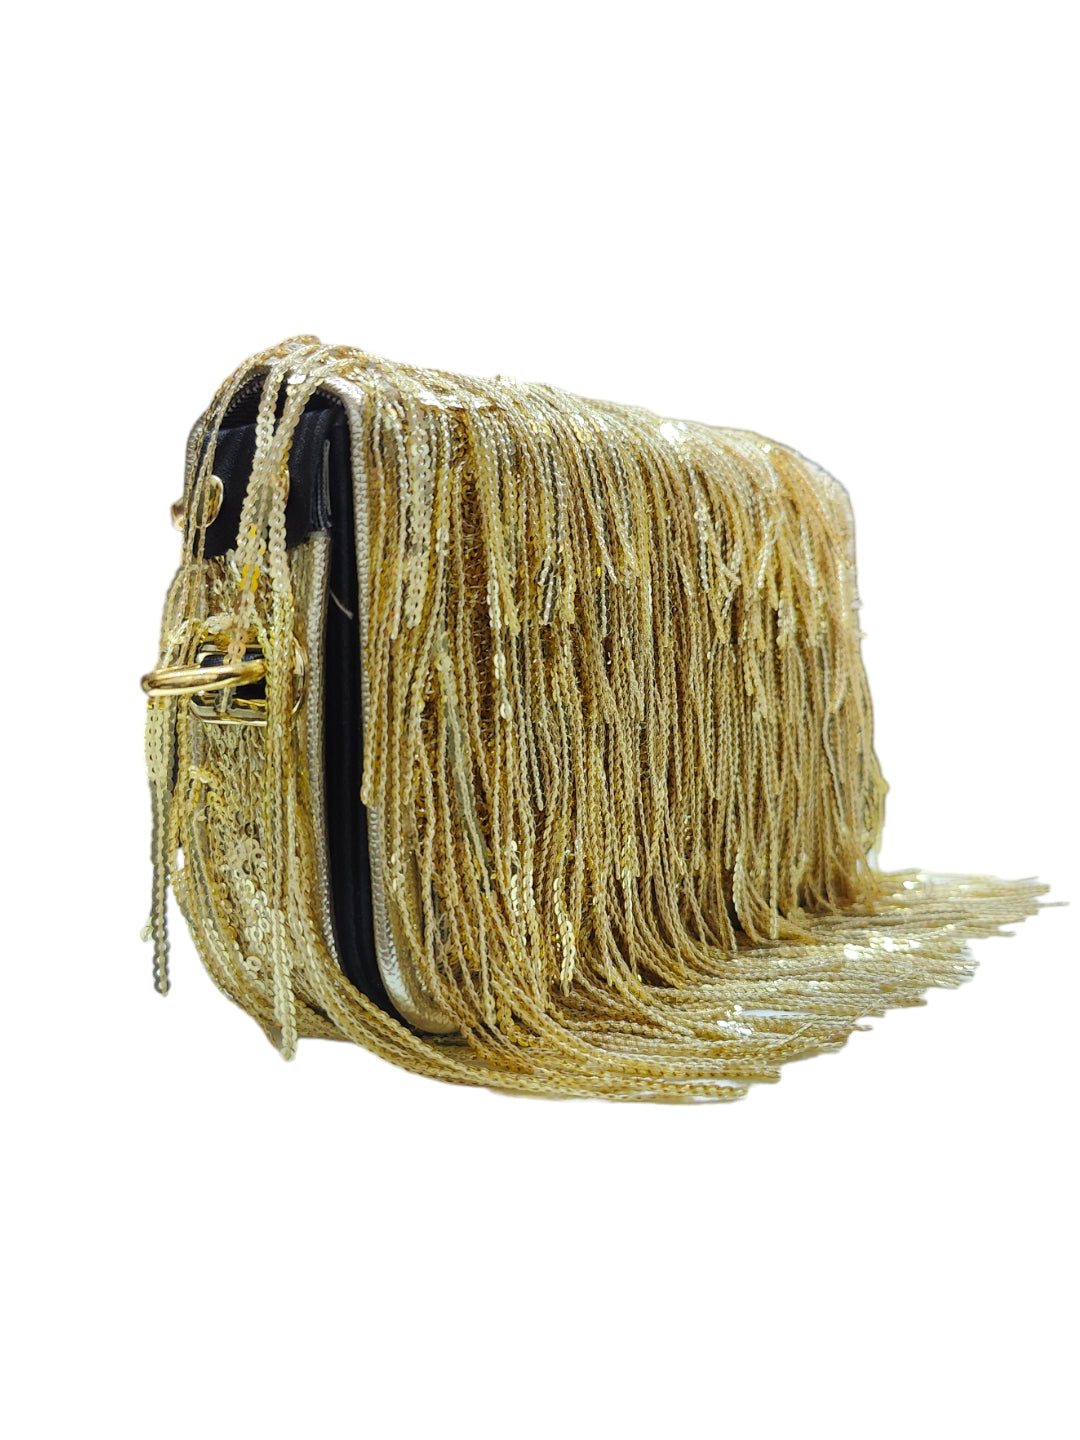 Embrace the spirit of the dance with our Ladies Belly Dancer Flip Waist Bag.